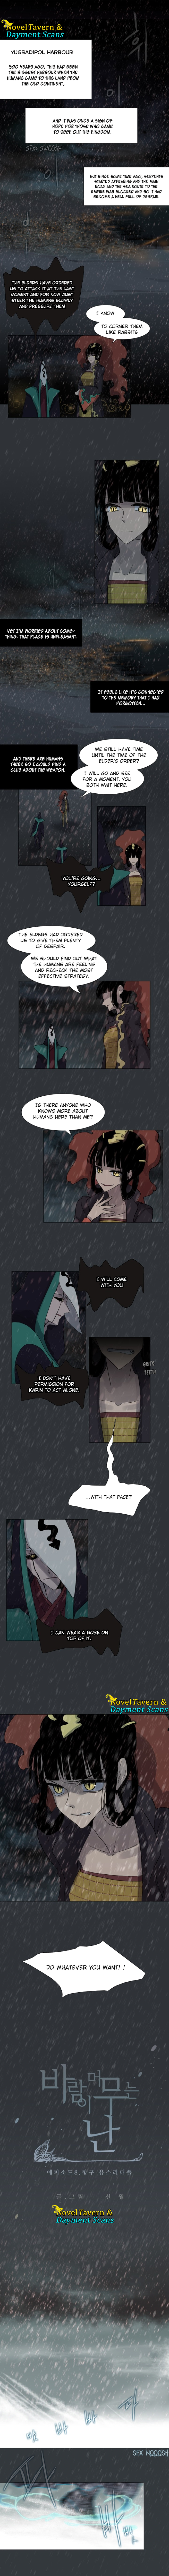 Abide In The Wind - Page 2